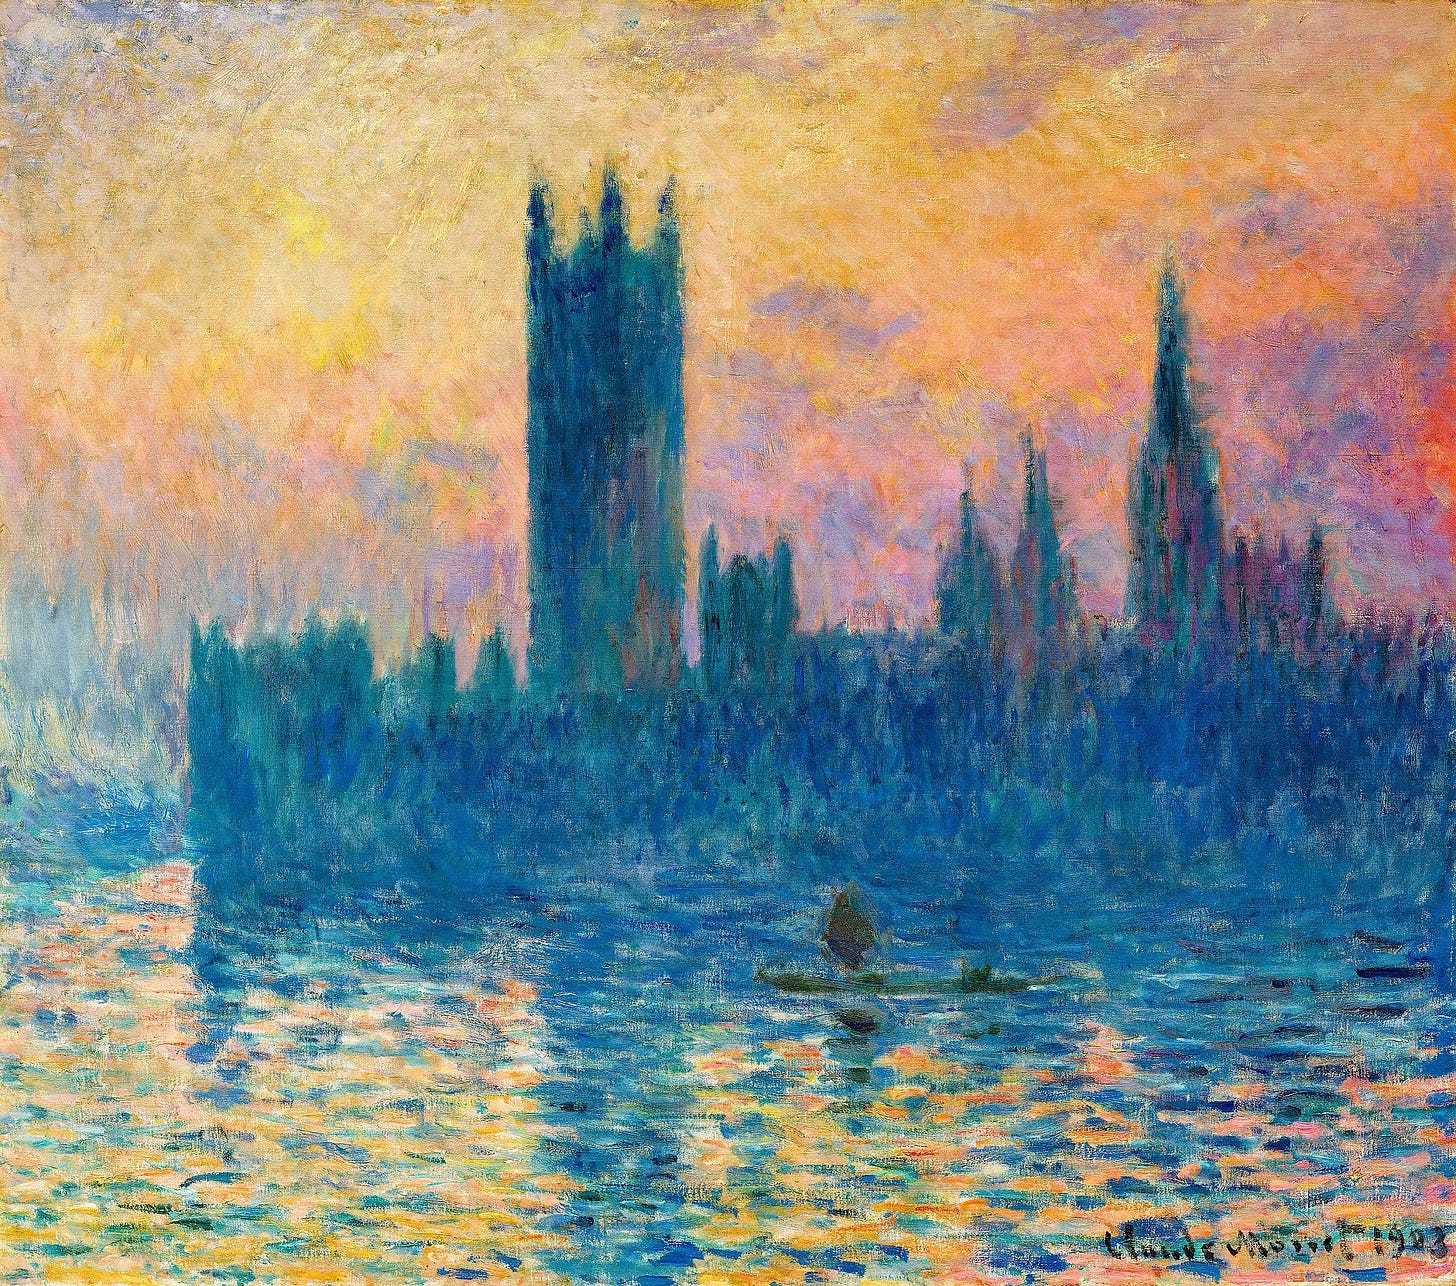 File:Claude Monet - The Houses of Parliament, Sunset.jpg - Wikipedia